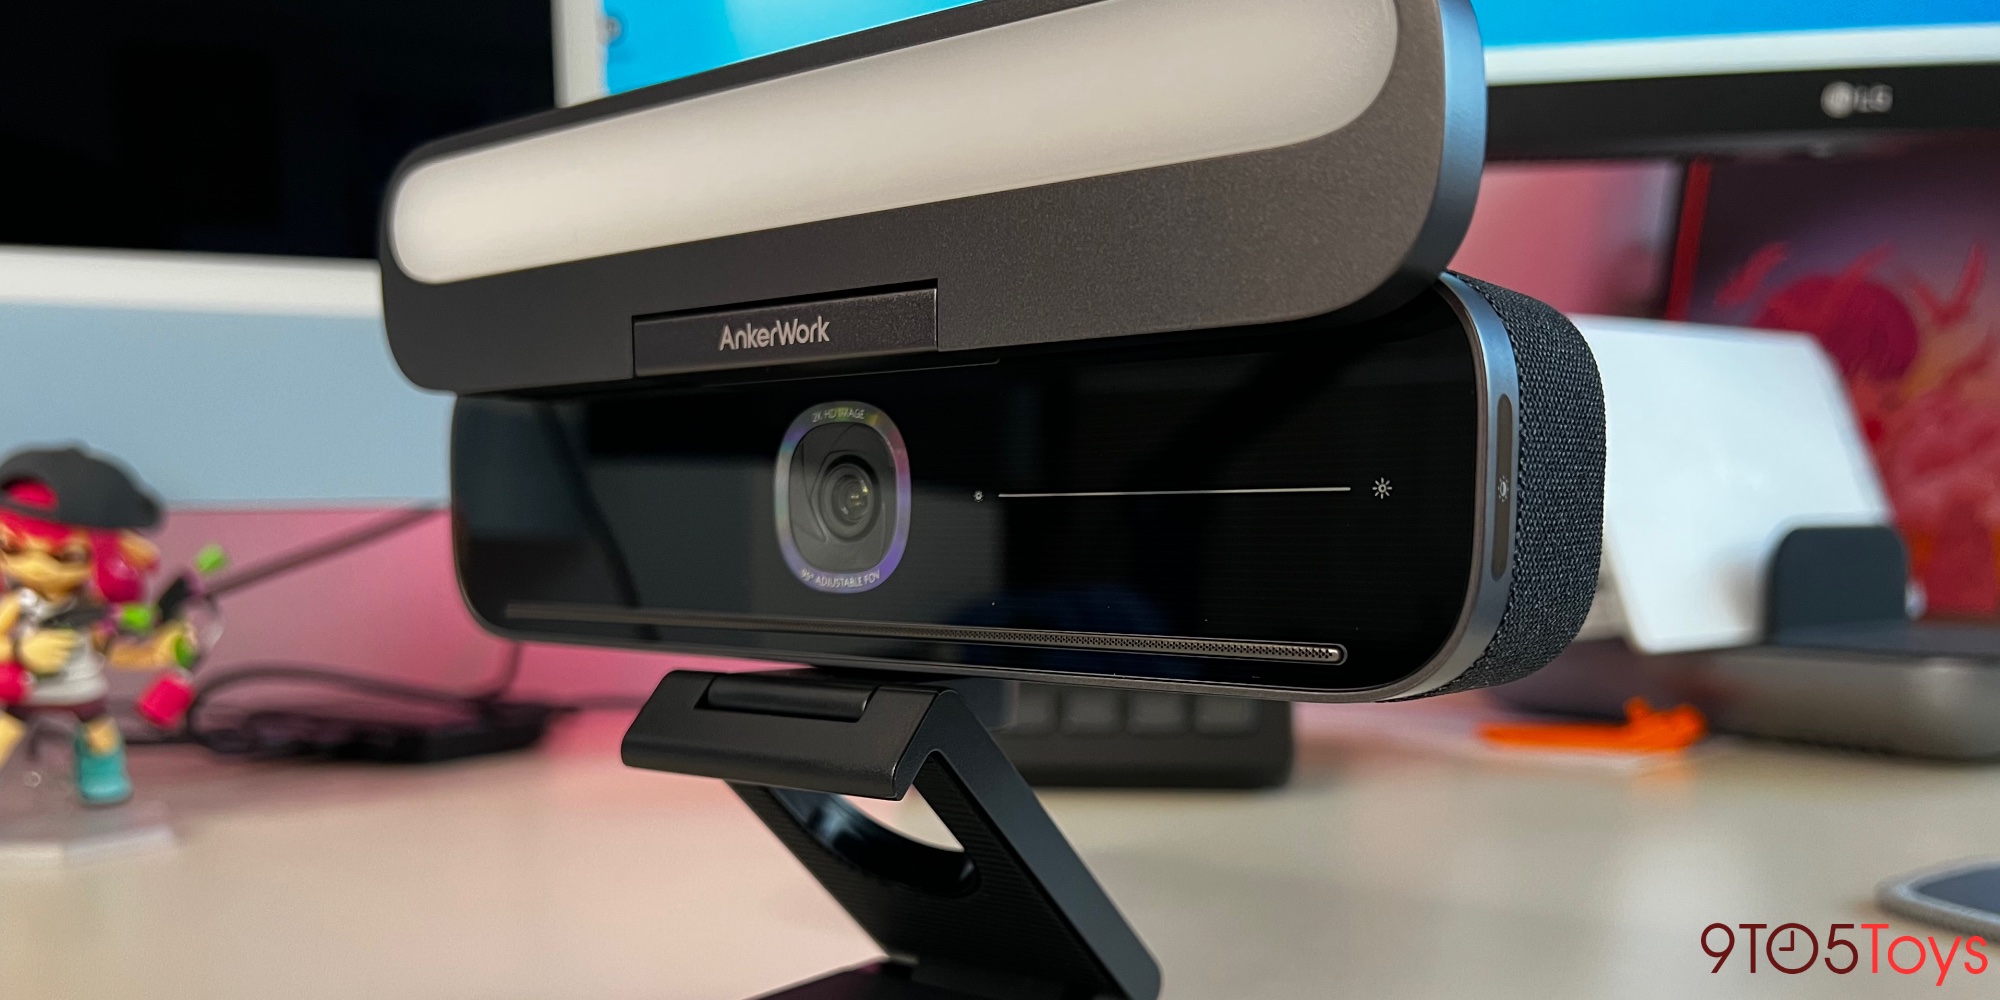 AnkerWork B600 Video Bar launches with 2K sensor and light - 9to5Toys